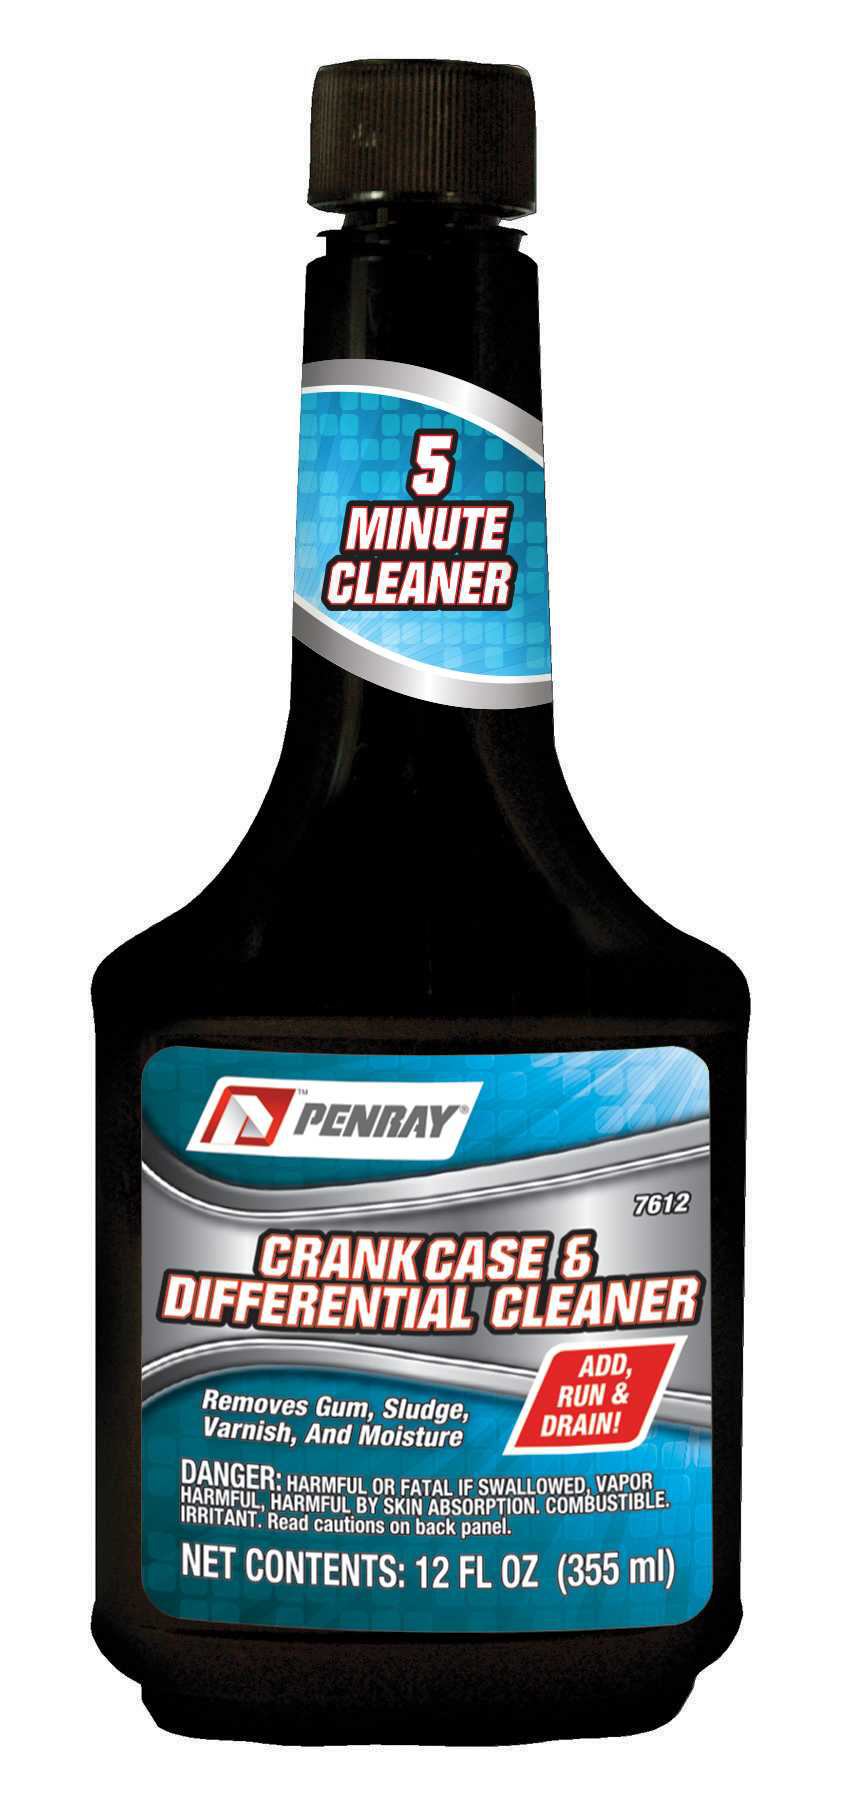 Penray Crankcase Differential Cleaner